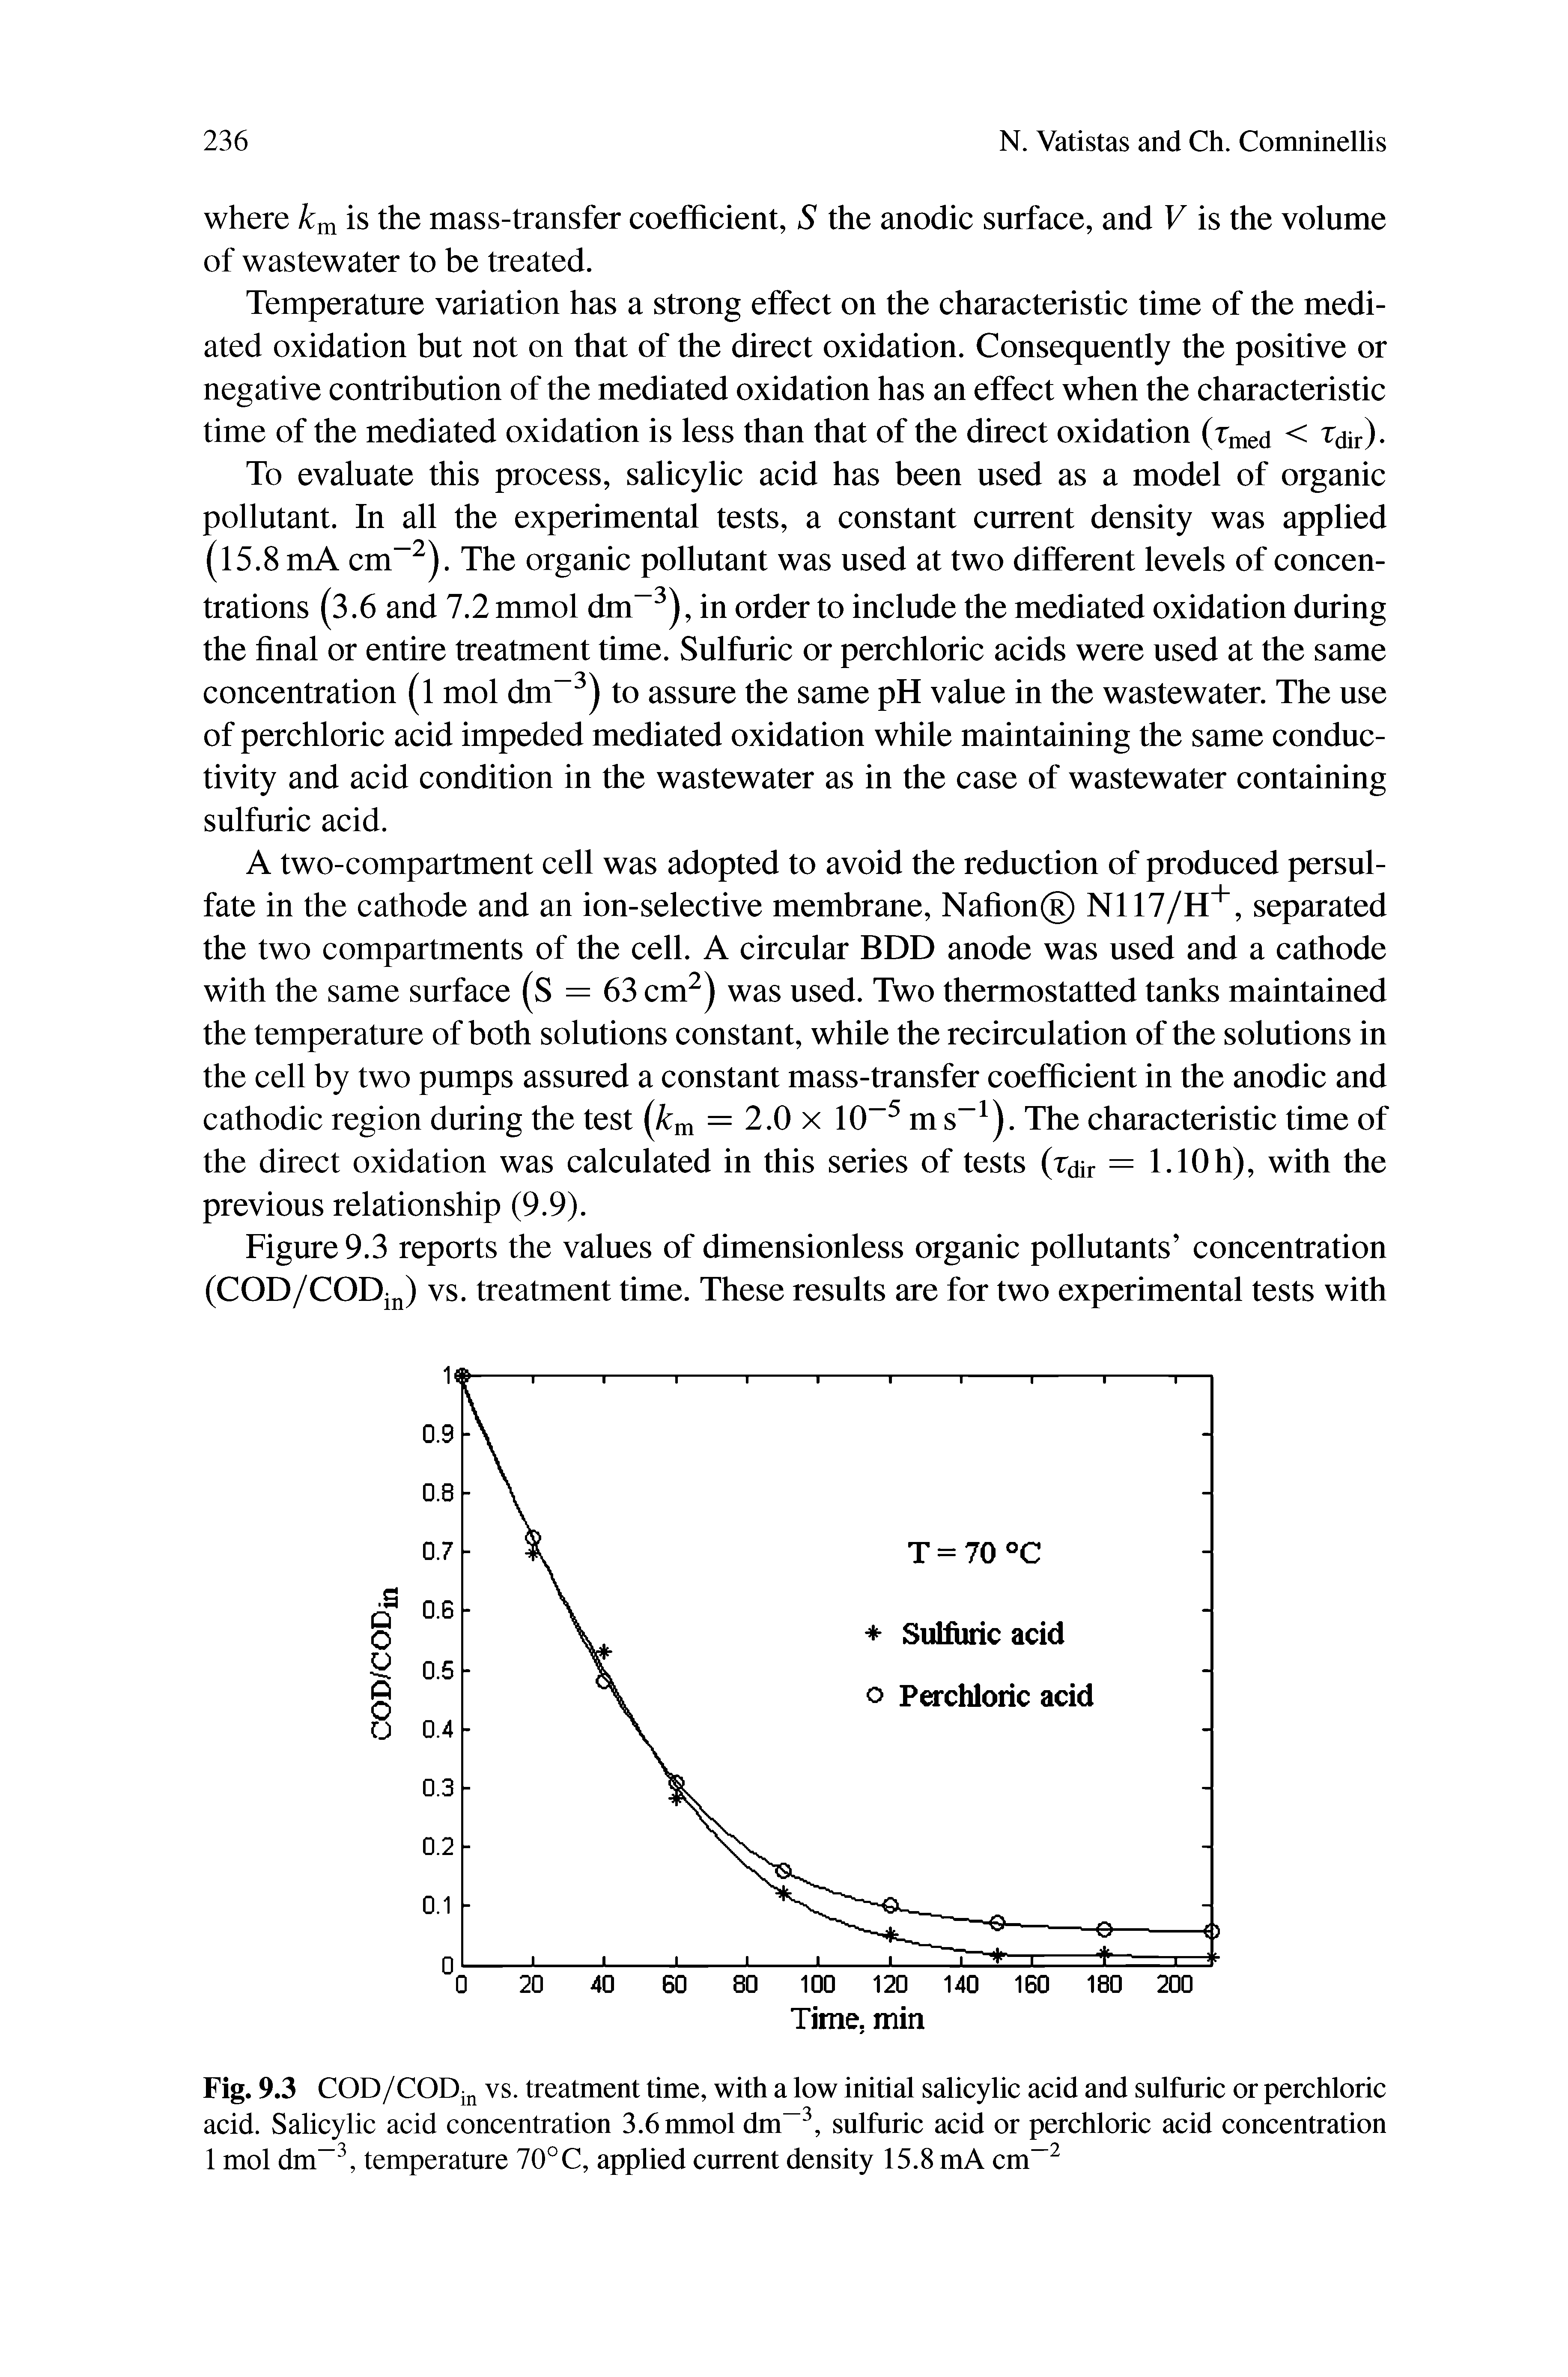 Fig. 9.3 COD/CODin vs. treatment time, with a low initial salicylic acid and sulfuric or perchloric acid. Salicylic acid concentration 3.6 mmol dm-3, sulfuric acid or perchloric acid concentration 1 mol dm-3, temperature 70°C, applied current density 15.8 mA cm-2...